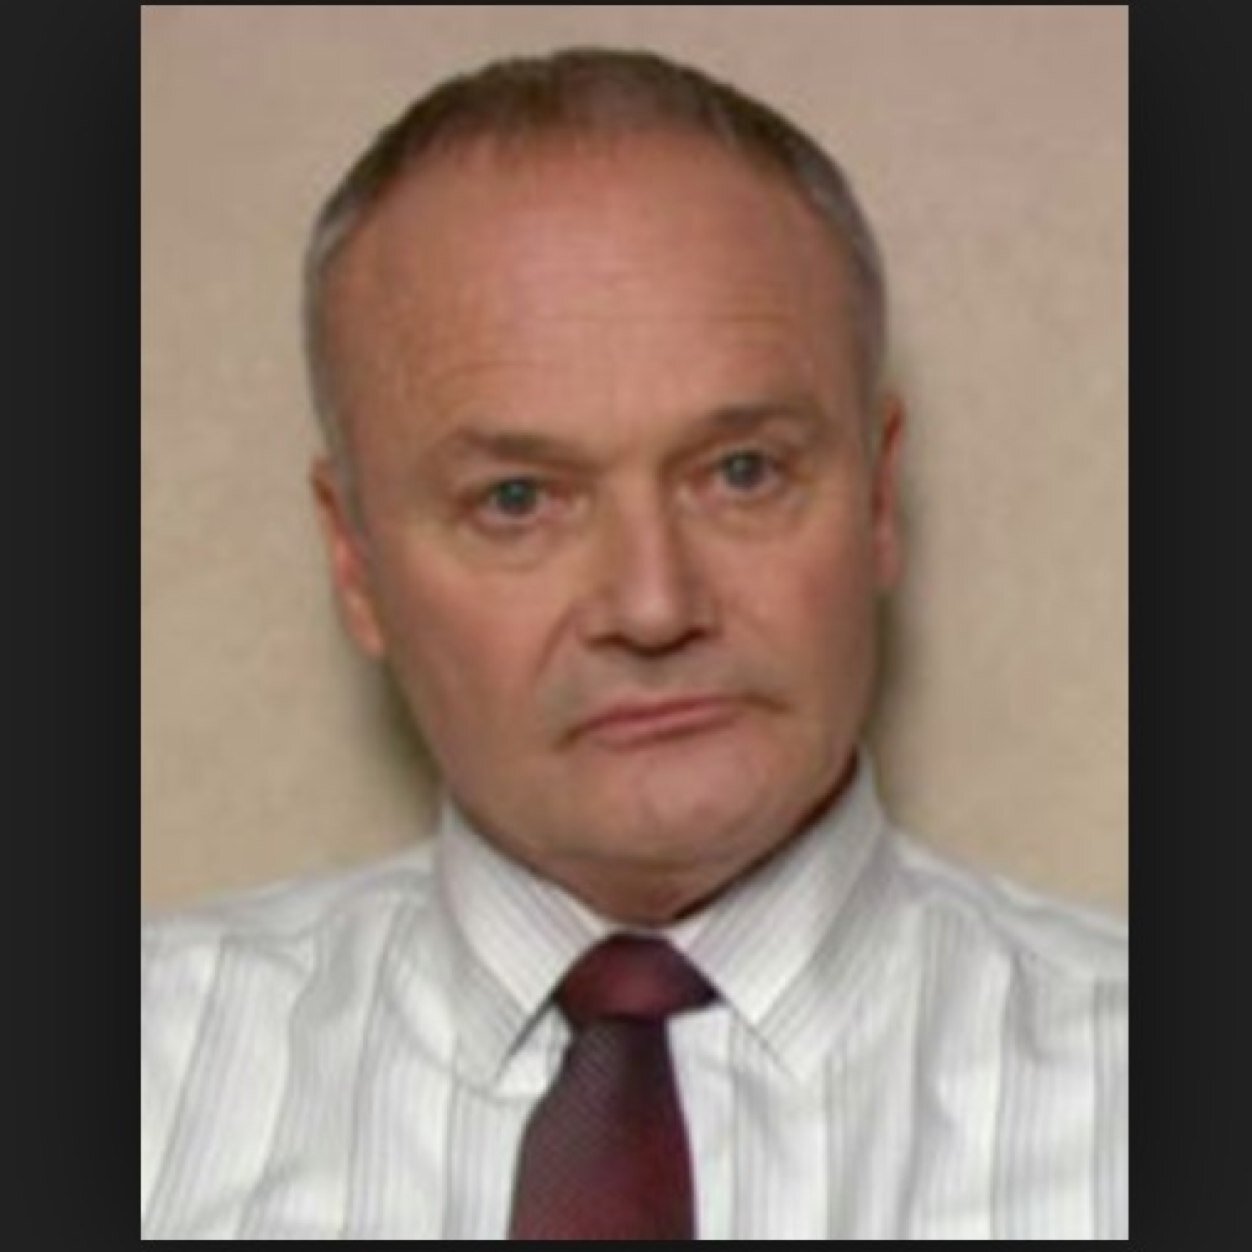 creed-bratton-images